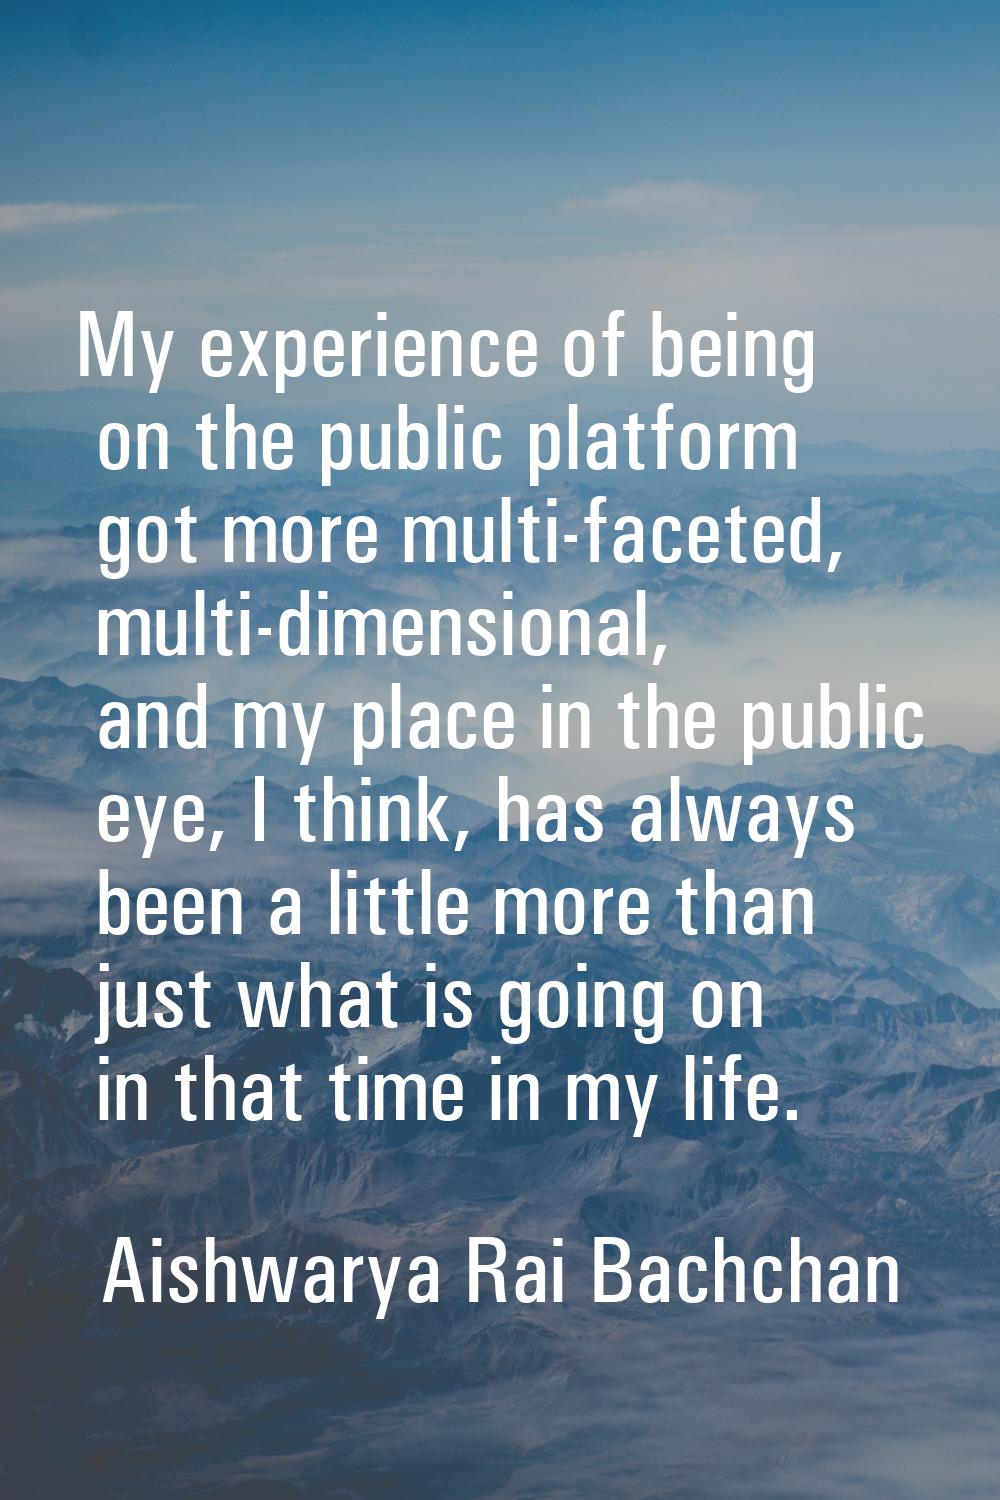 My experience of being on the public platform got more multi-faceted, multi-dimensional, and my pla